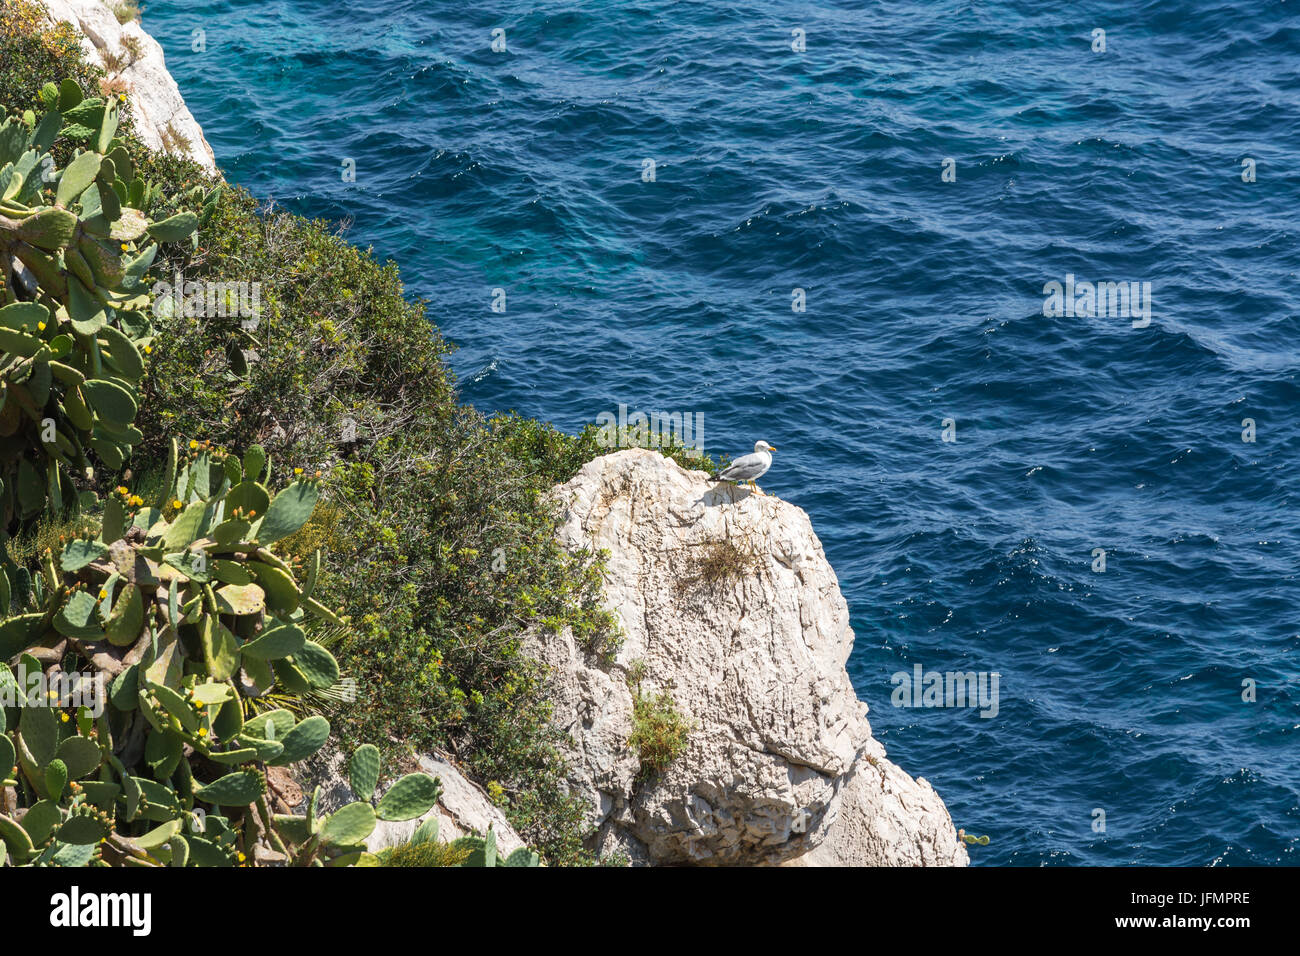 Seagull on a rock formation in the Mediterranean Stock Photo